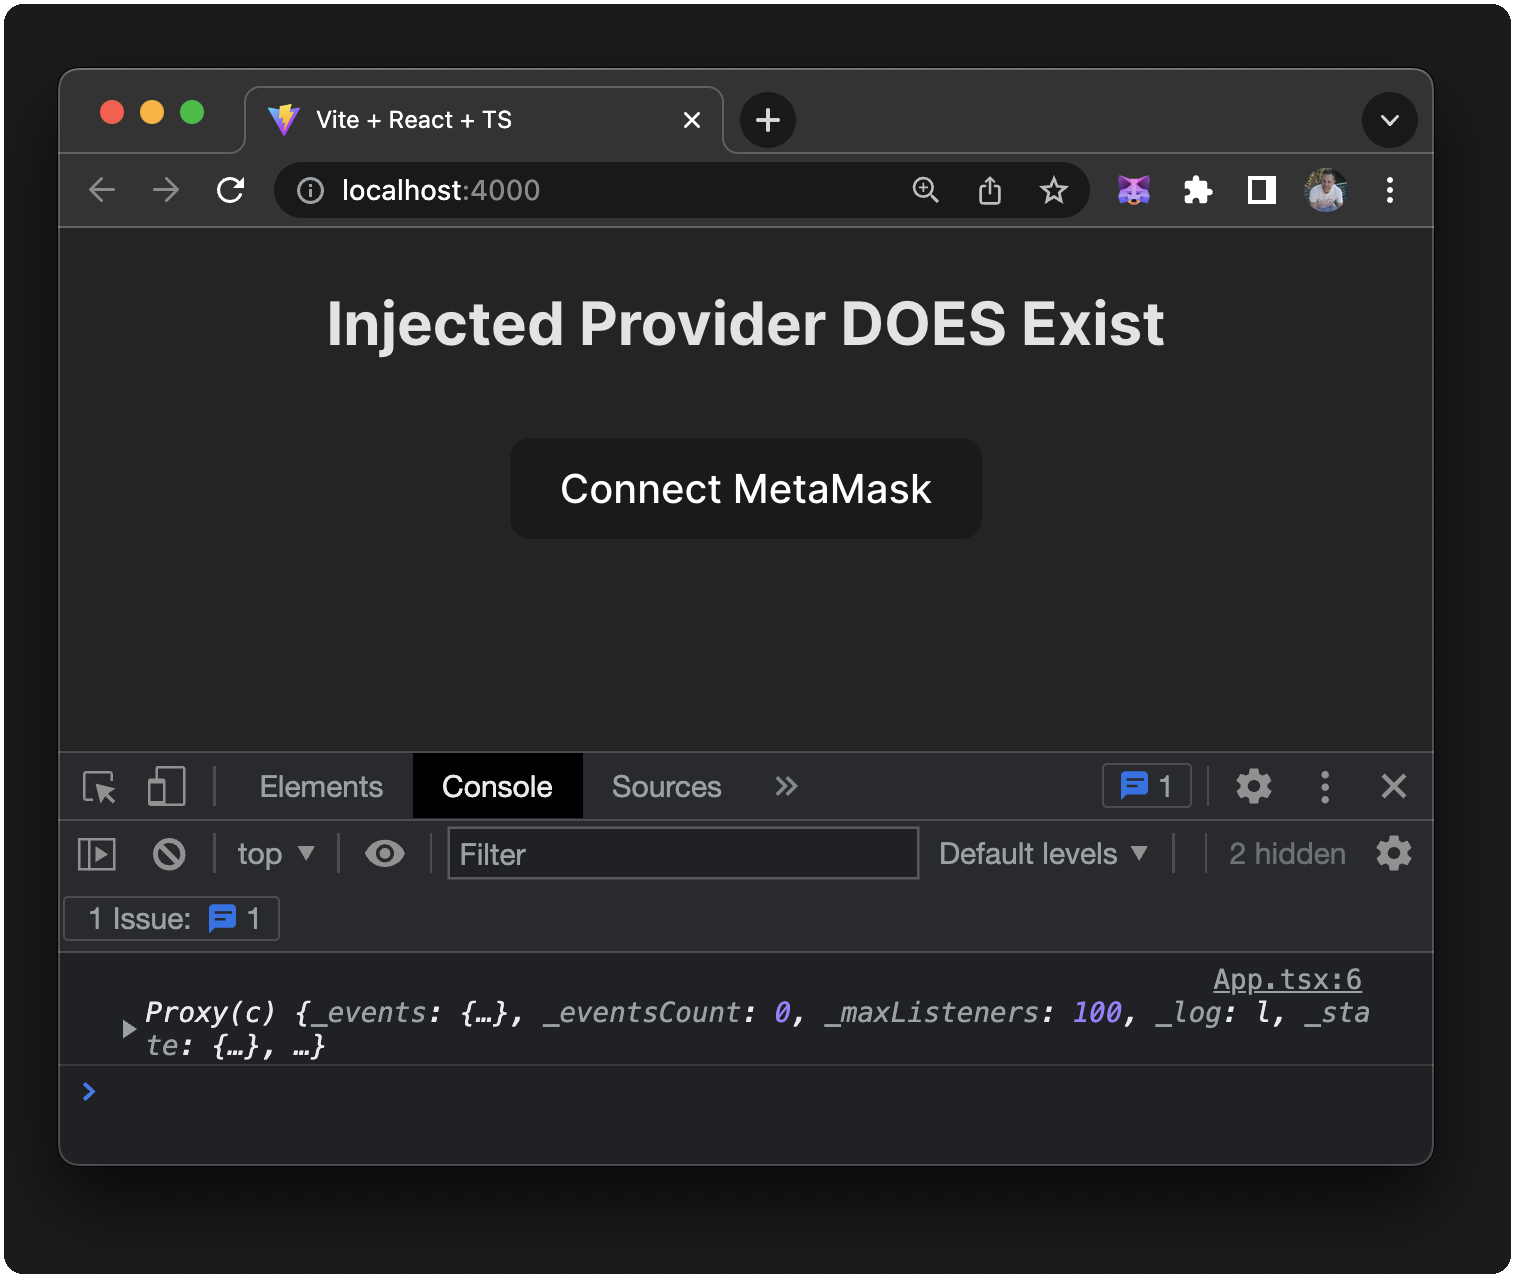 Injected Provider DOES Exist